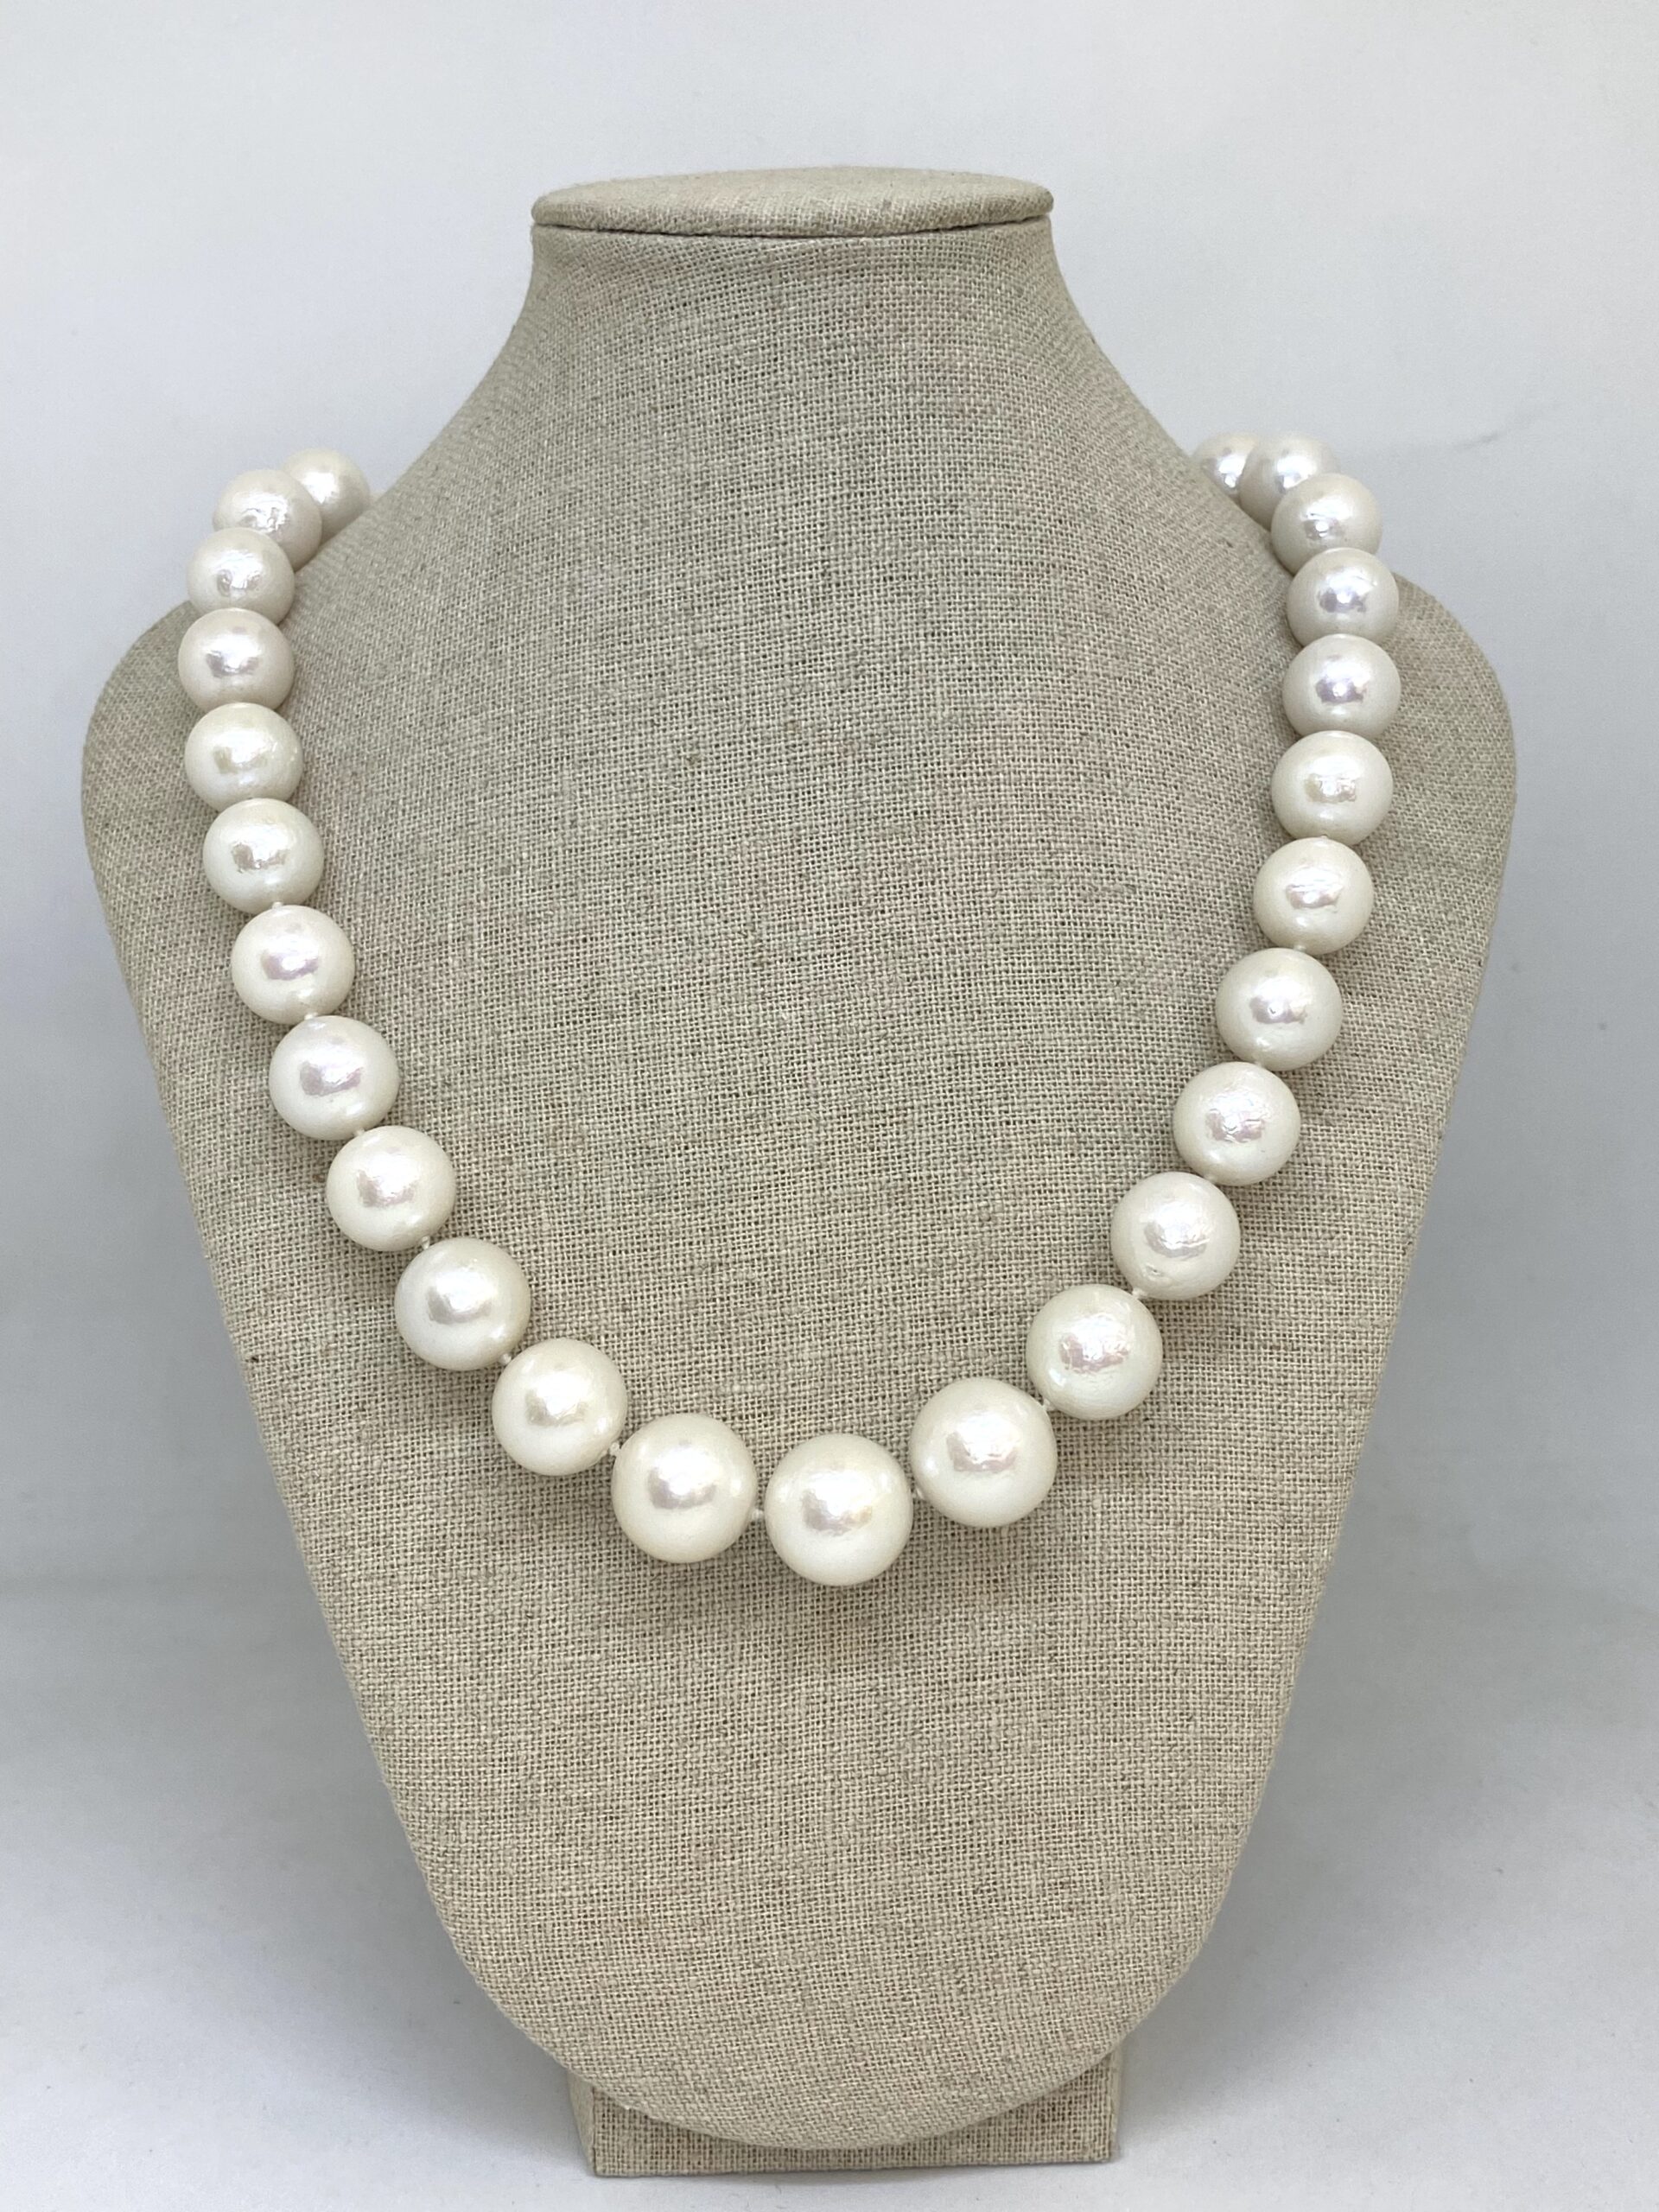 Large Graduated Pearl Necklace. - By Design Jewellers Killarney Mall